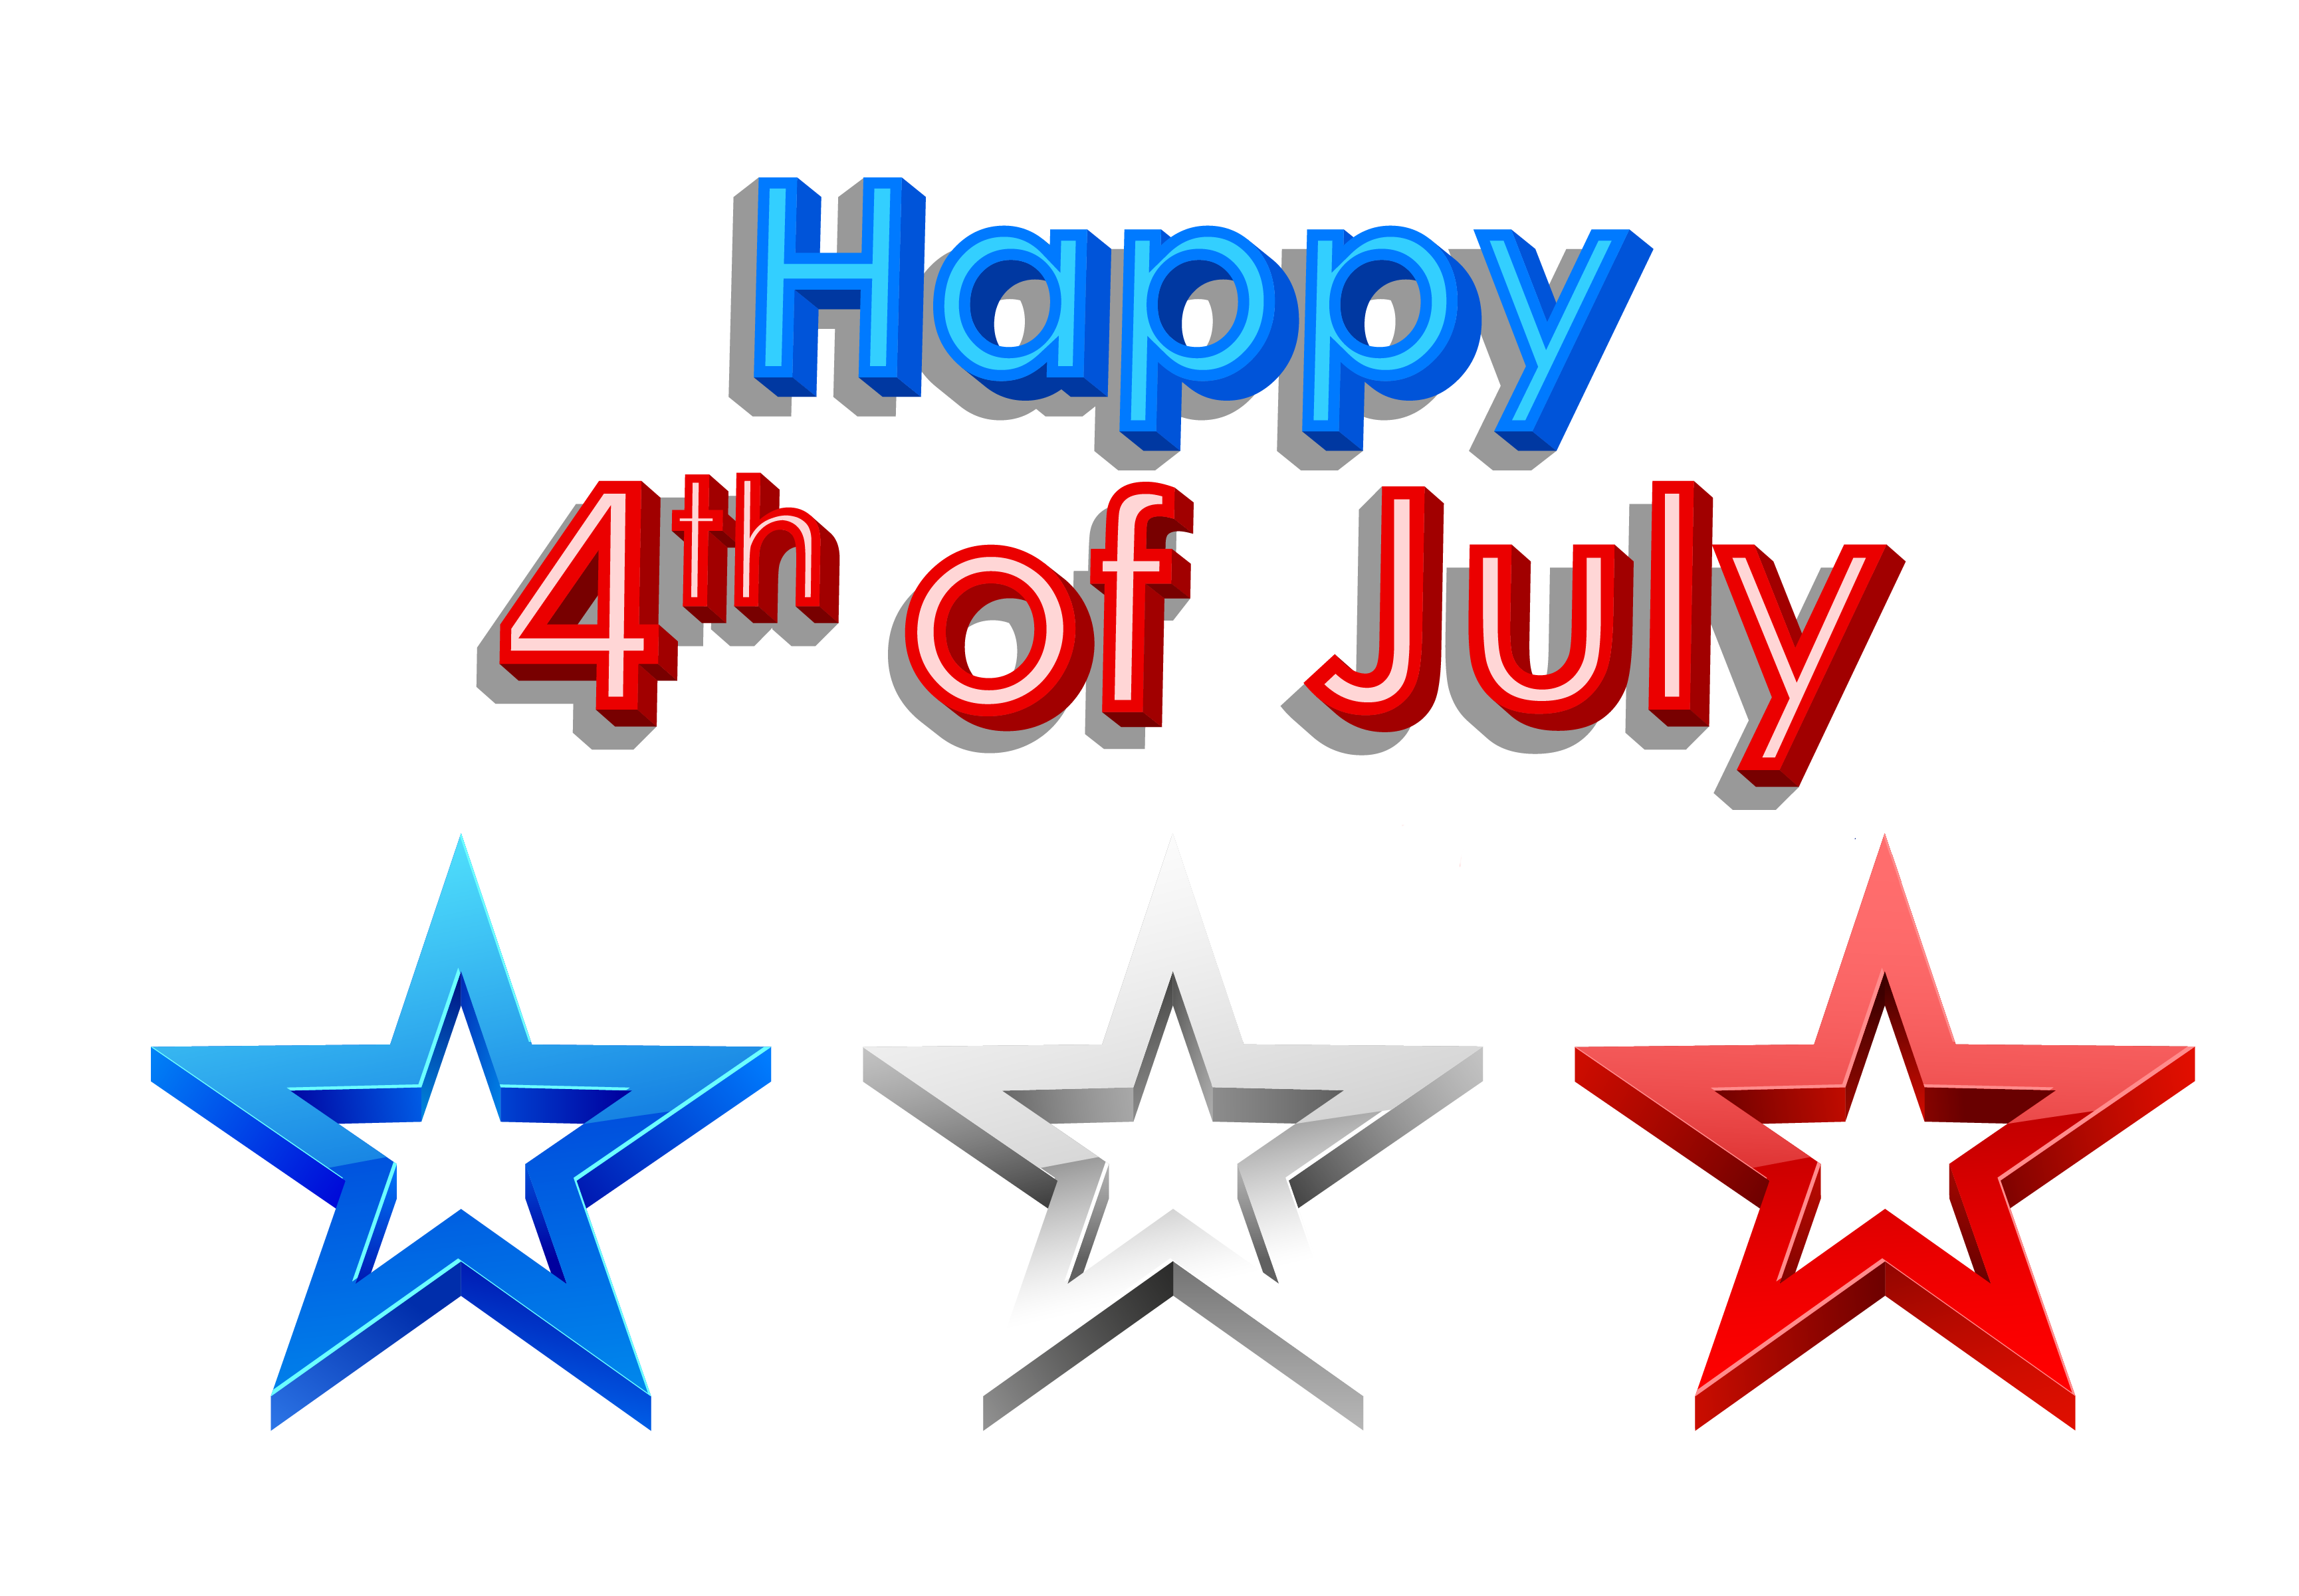 4th Of July Fireworks Clipart Png | Clipart Panda - Free Clipart ...